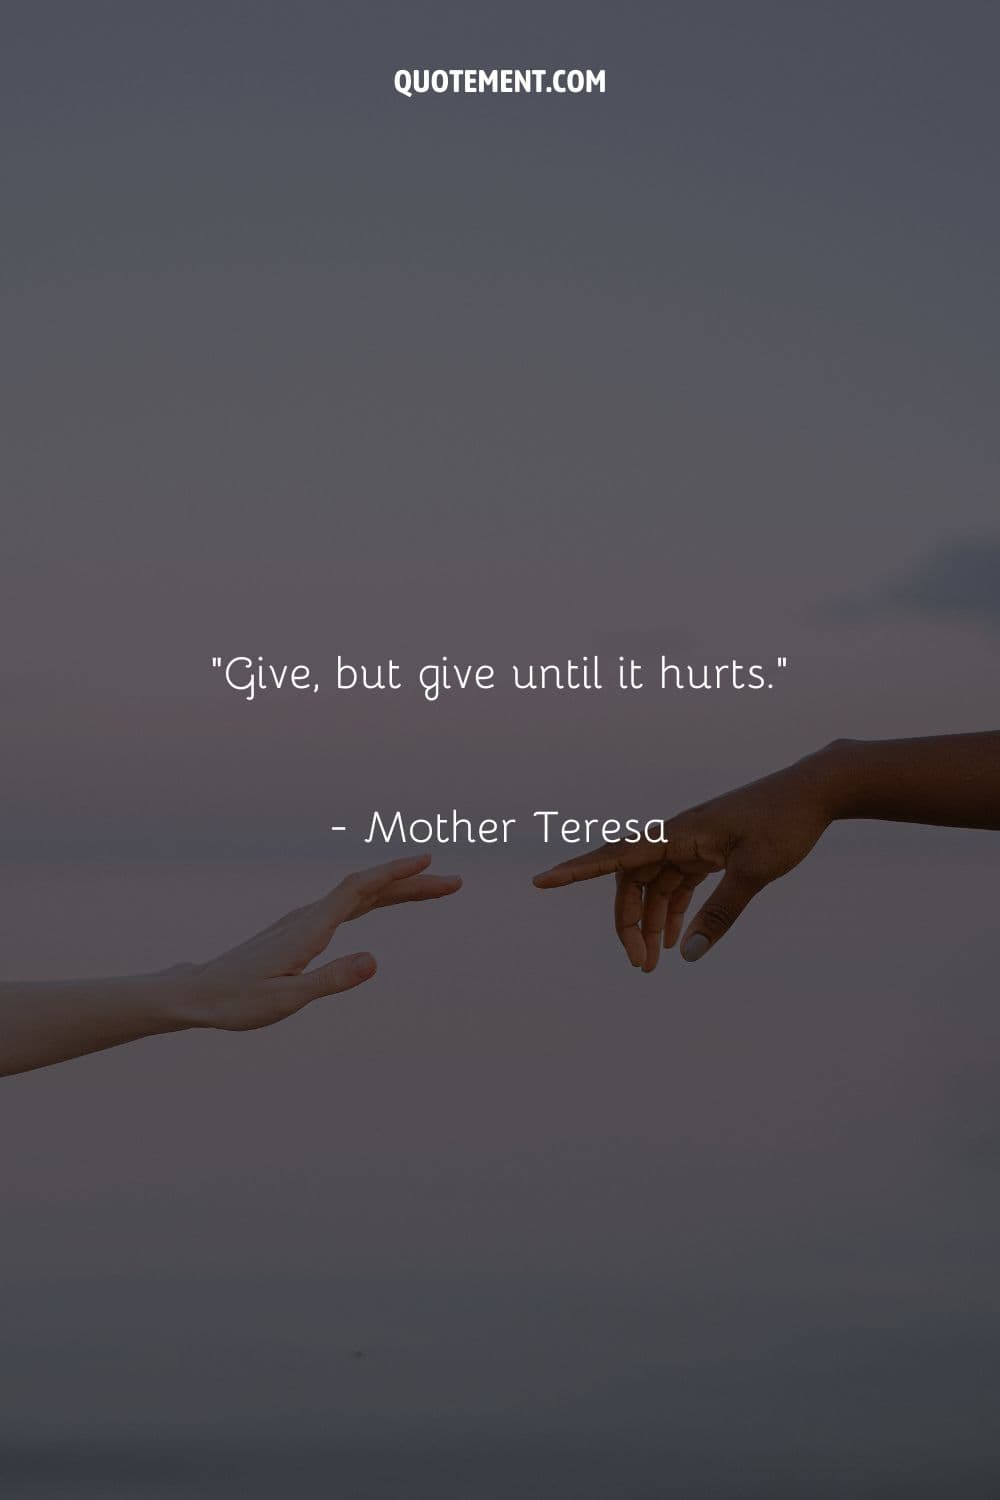 Give, but give until it hurts